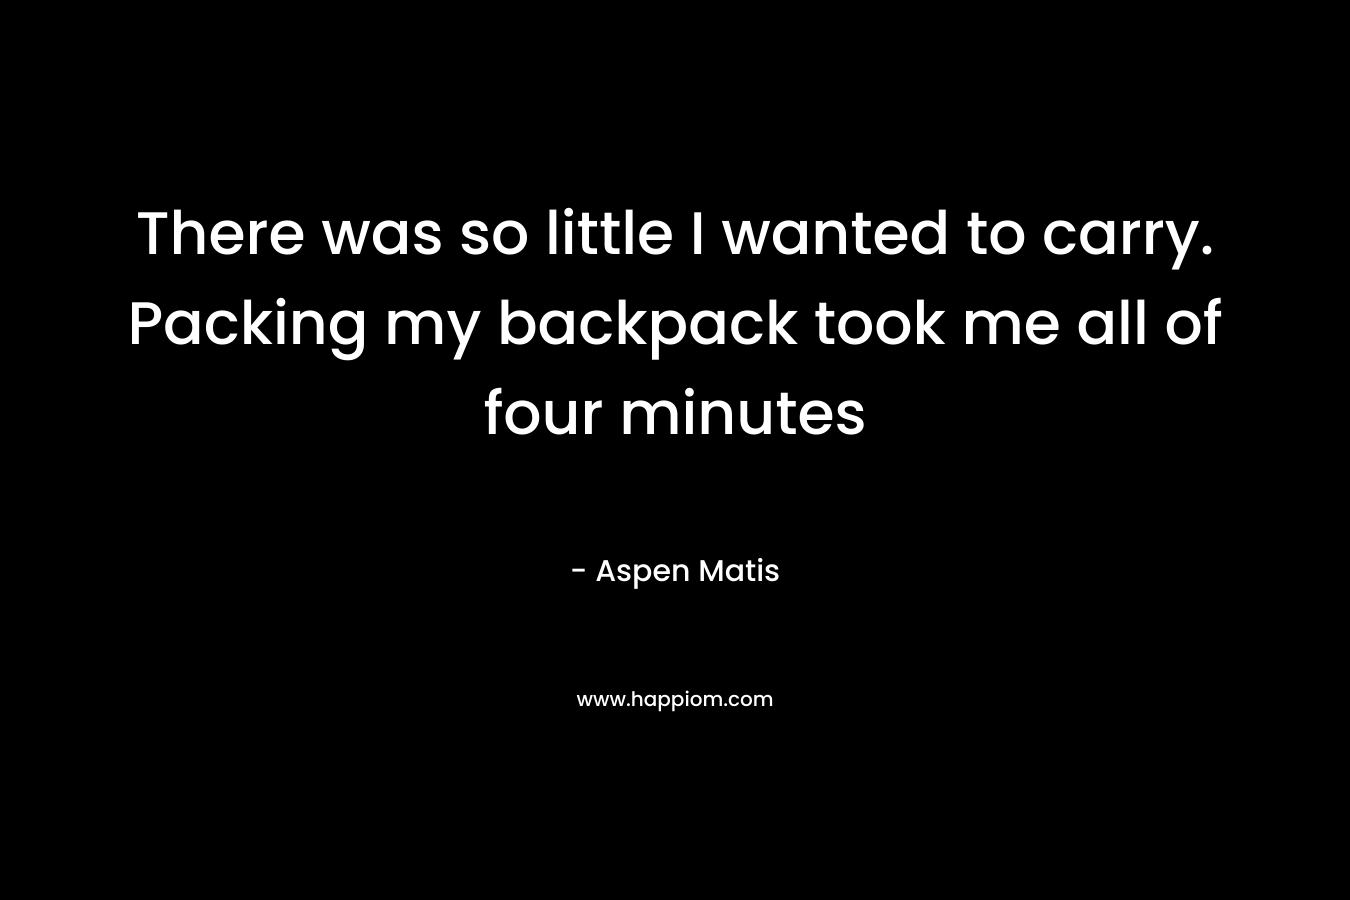 There was so little I wanted to carry. Packing my backpack took me all of four minutes – Aspen Matis